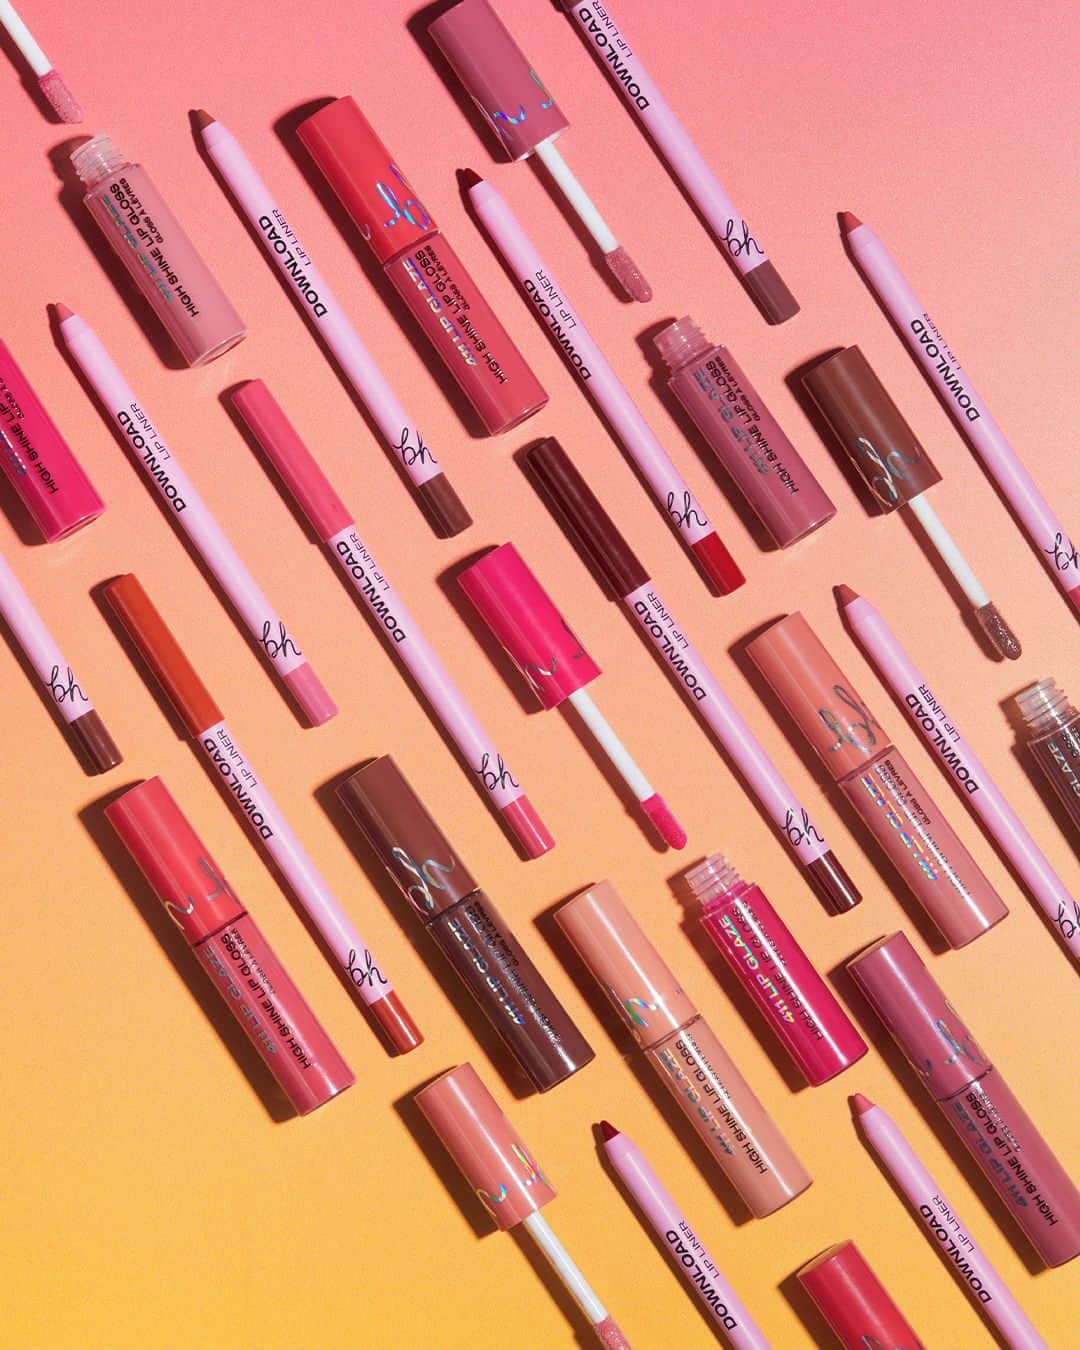 BH Cosmeticsのインスタグラム：「NEW LIPS, WHO DIS⁉️ Pucker up this fall szn in our ✨just dropped✨ 411 Lip Glaze Cream Glosses and Download Lip Liners! 👄 Get alllll the deets on the new lip lineup of your dreams! 👇⁣⁣⁣ ⁣⁣ 💋 411 LIP GLAZE Cream Glosses: Powerfully-pigmented, high-shine cream glosses with a buttery, glazed finish. Available in 8 shades!⁣⁣ 💋 DOWNLOAD Lip Liners: Soft matte lip pencils that effortlessly apply and precisely define lips for long-lasting color. Available in 8 shades!⁣⁣ ⁣⁣ All these hot drops are ⬇️⁣⁣⁣⁣ 🌱 Vegan⁣⁣⁣⁣ 🧼 Clean⁣⁣⁣⁣ 🐰 Cruelty-Free⁣⁣⁣⁣ ⁣⁣⁣⁣ Leave a ❤️ in the comments if you want to try these new pout perfecters! ⁣⁣ ⁣⁣ #bhcosmetics」